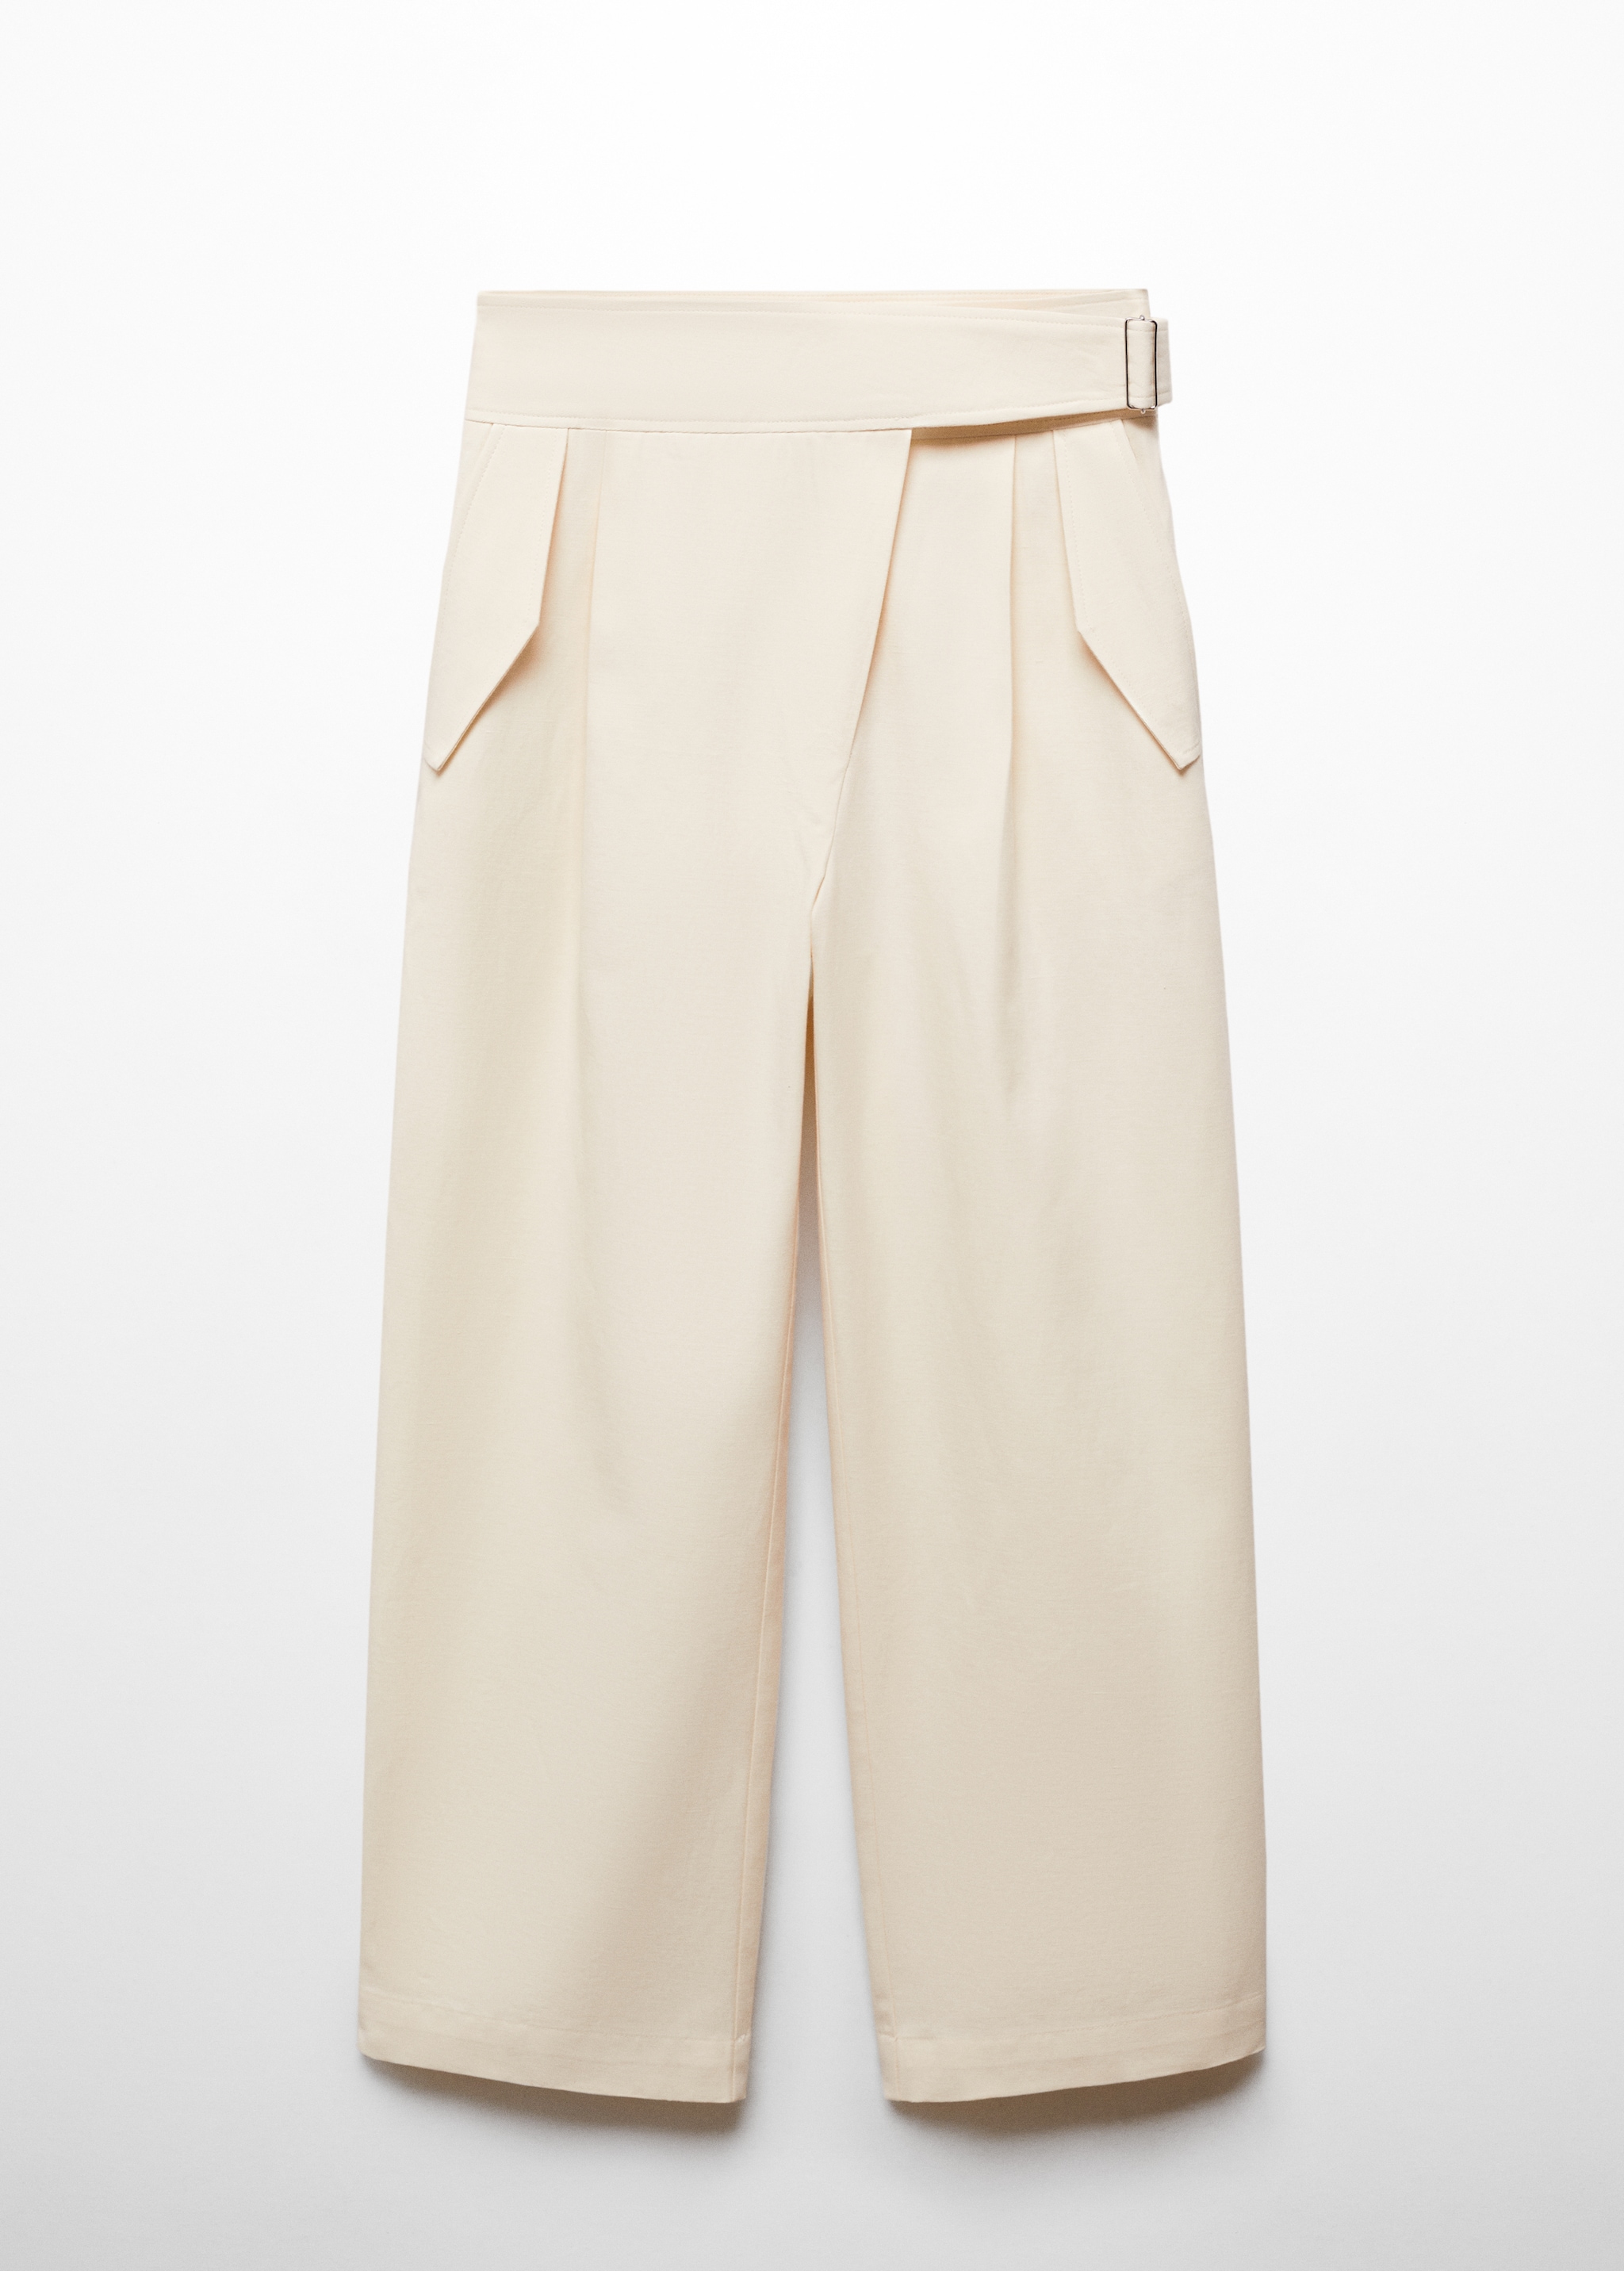 Crossed pleat trousers - Article without model